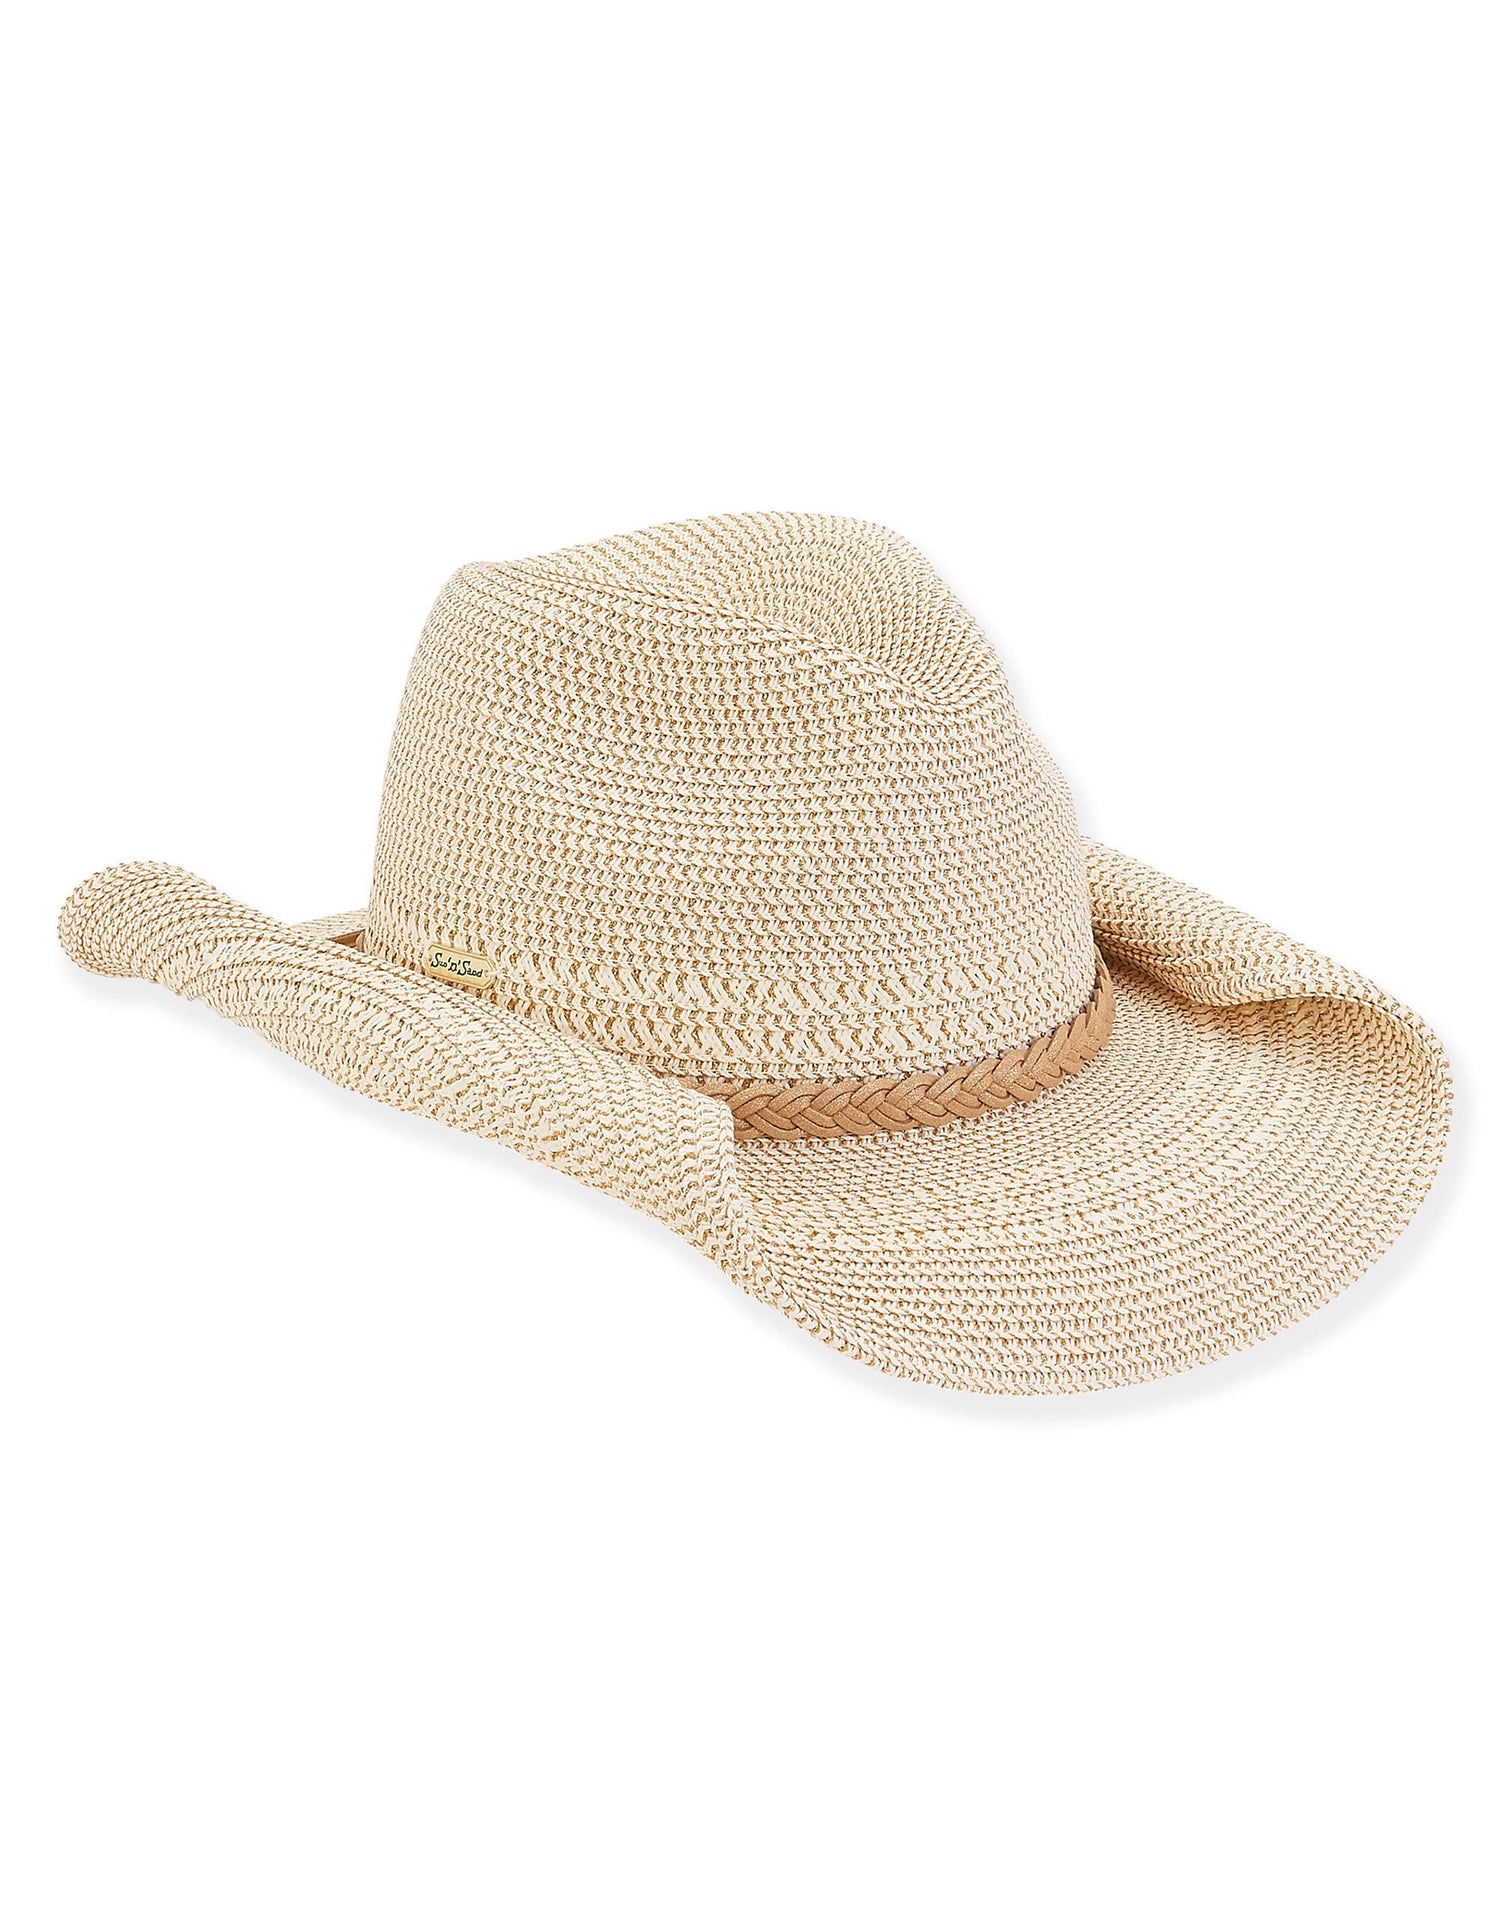 Paper Braid Western Hat by Sun N Sand in Ivory - Angled View